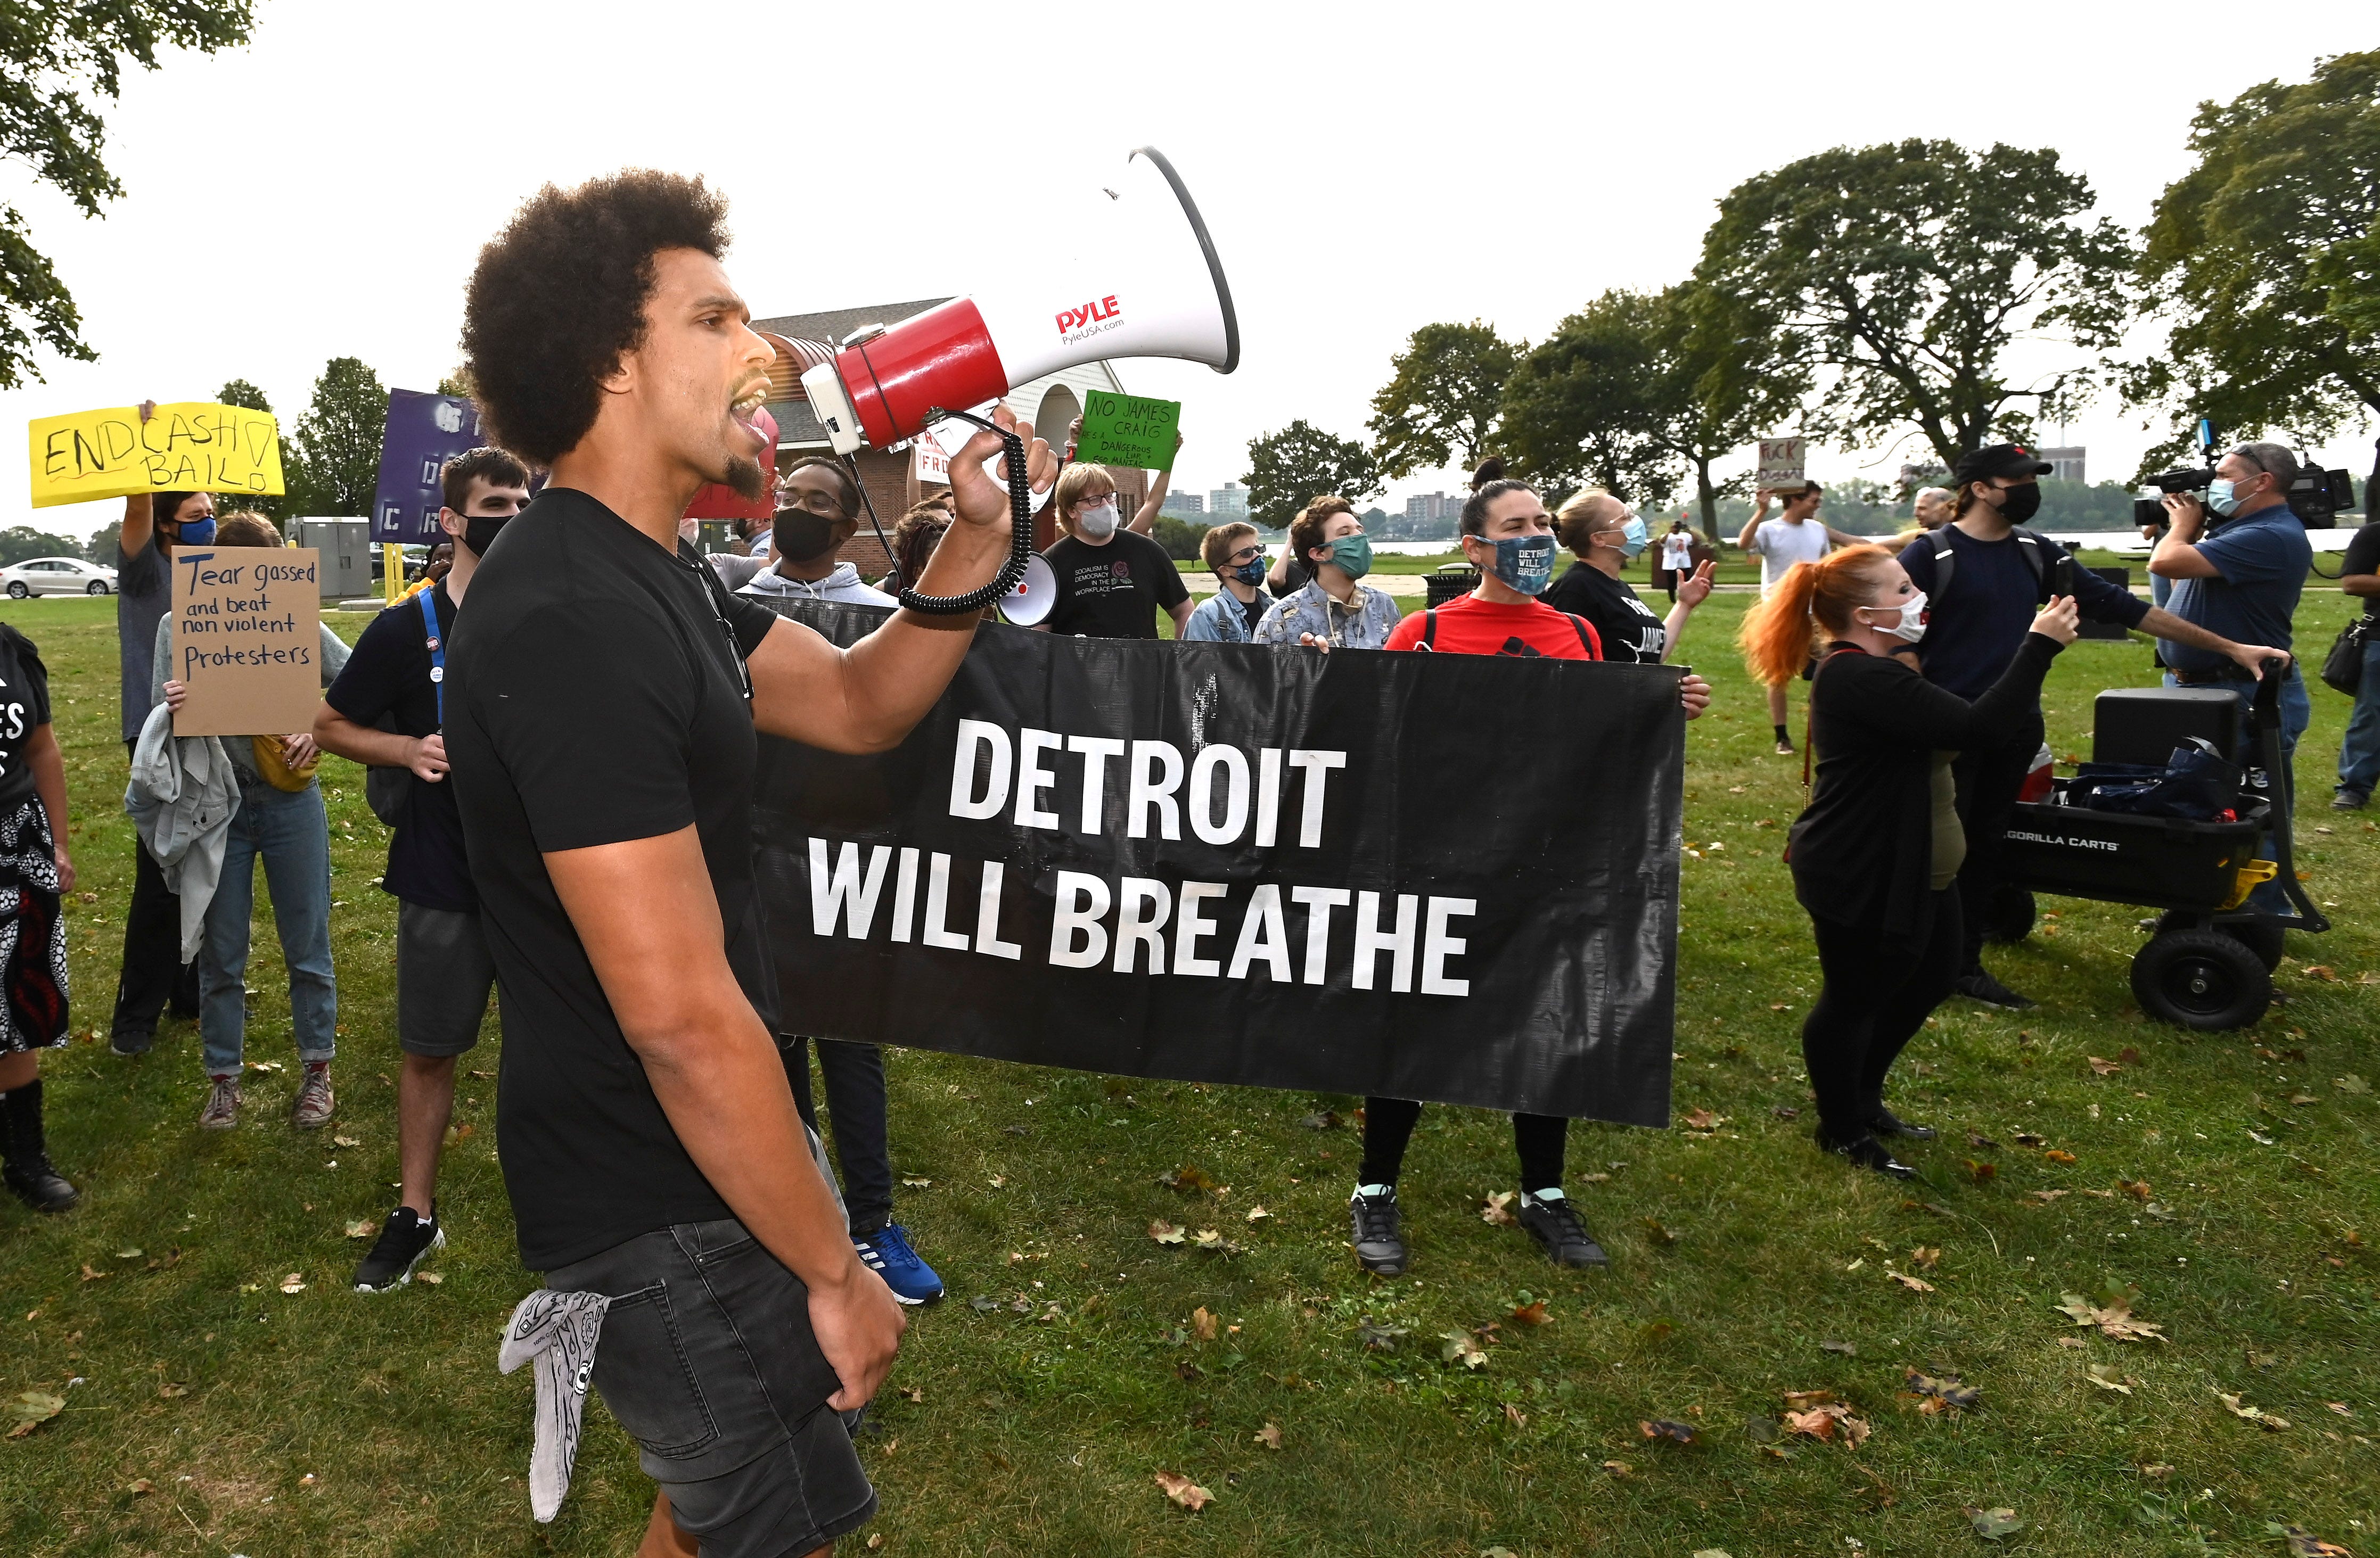 Detroit Will Breathe member Lloyd Simpson, of Detroit, leads anti-Craig chants as a few dozen arrive on Belle Isle before former DPD Chief James Craig arrives, Tuesday morning, September 14, 2021.